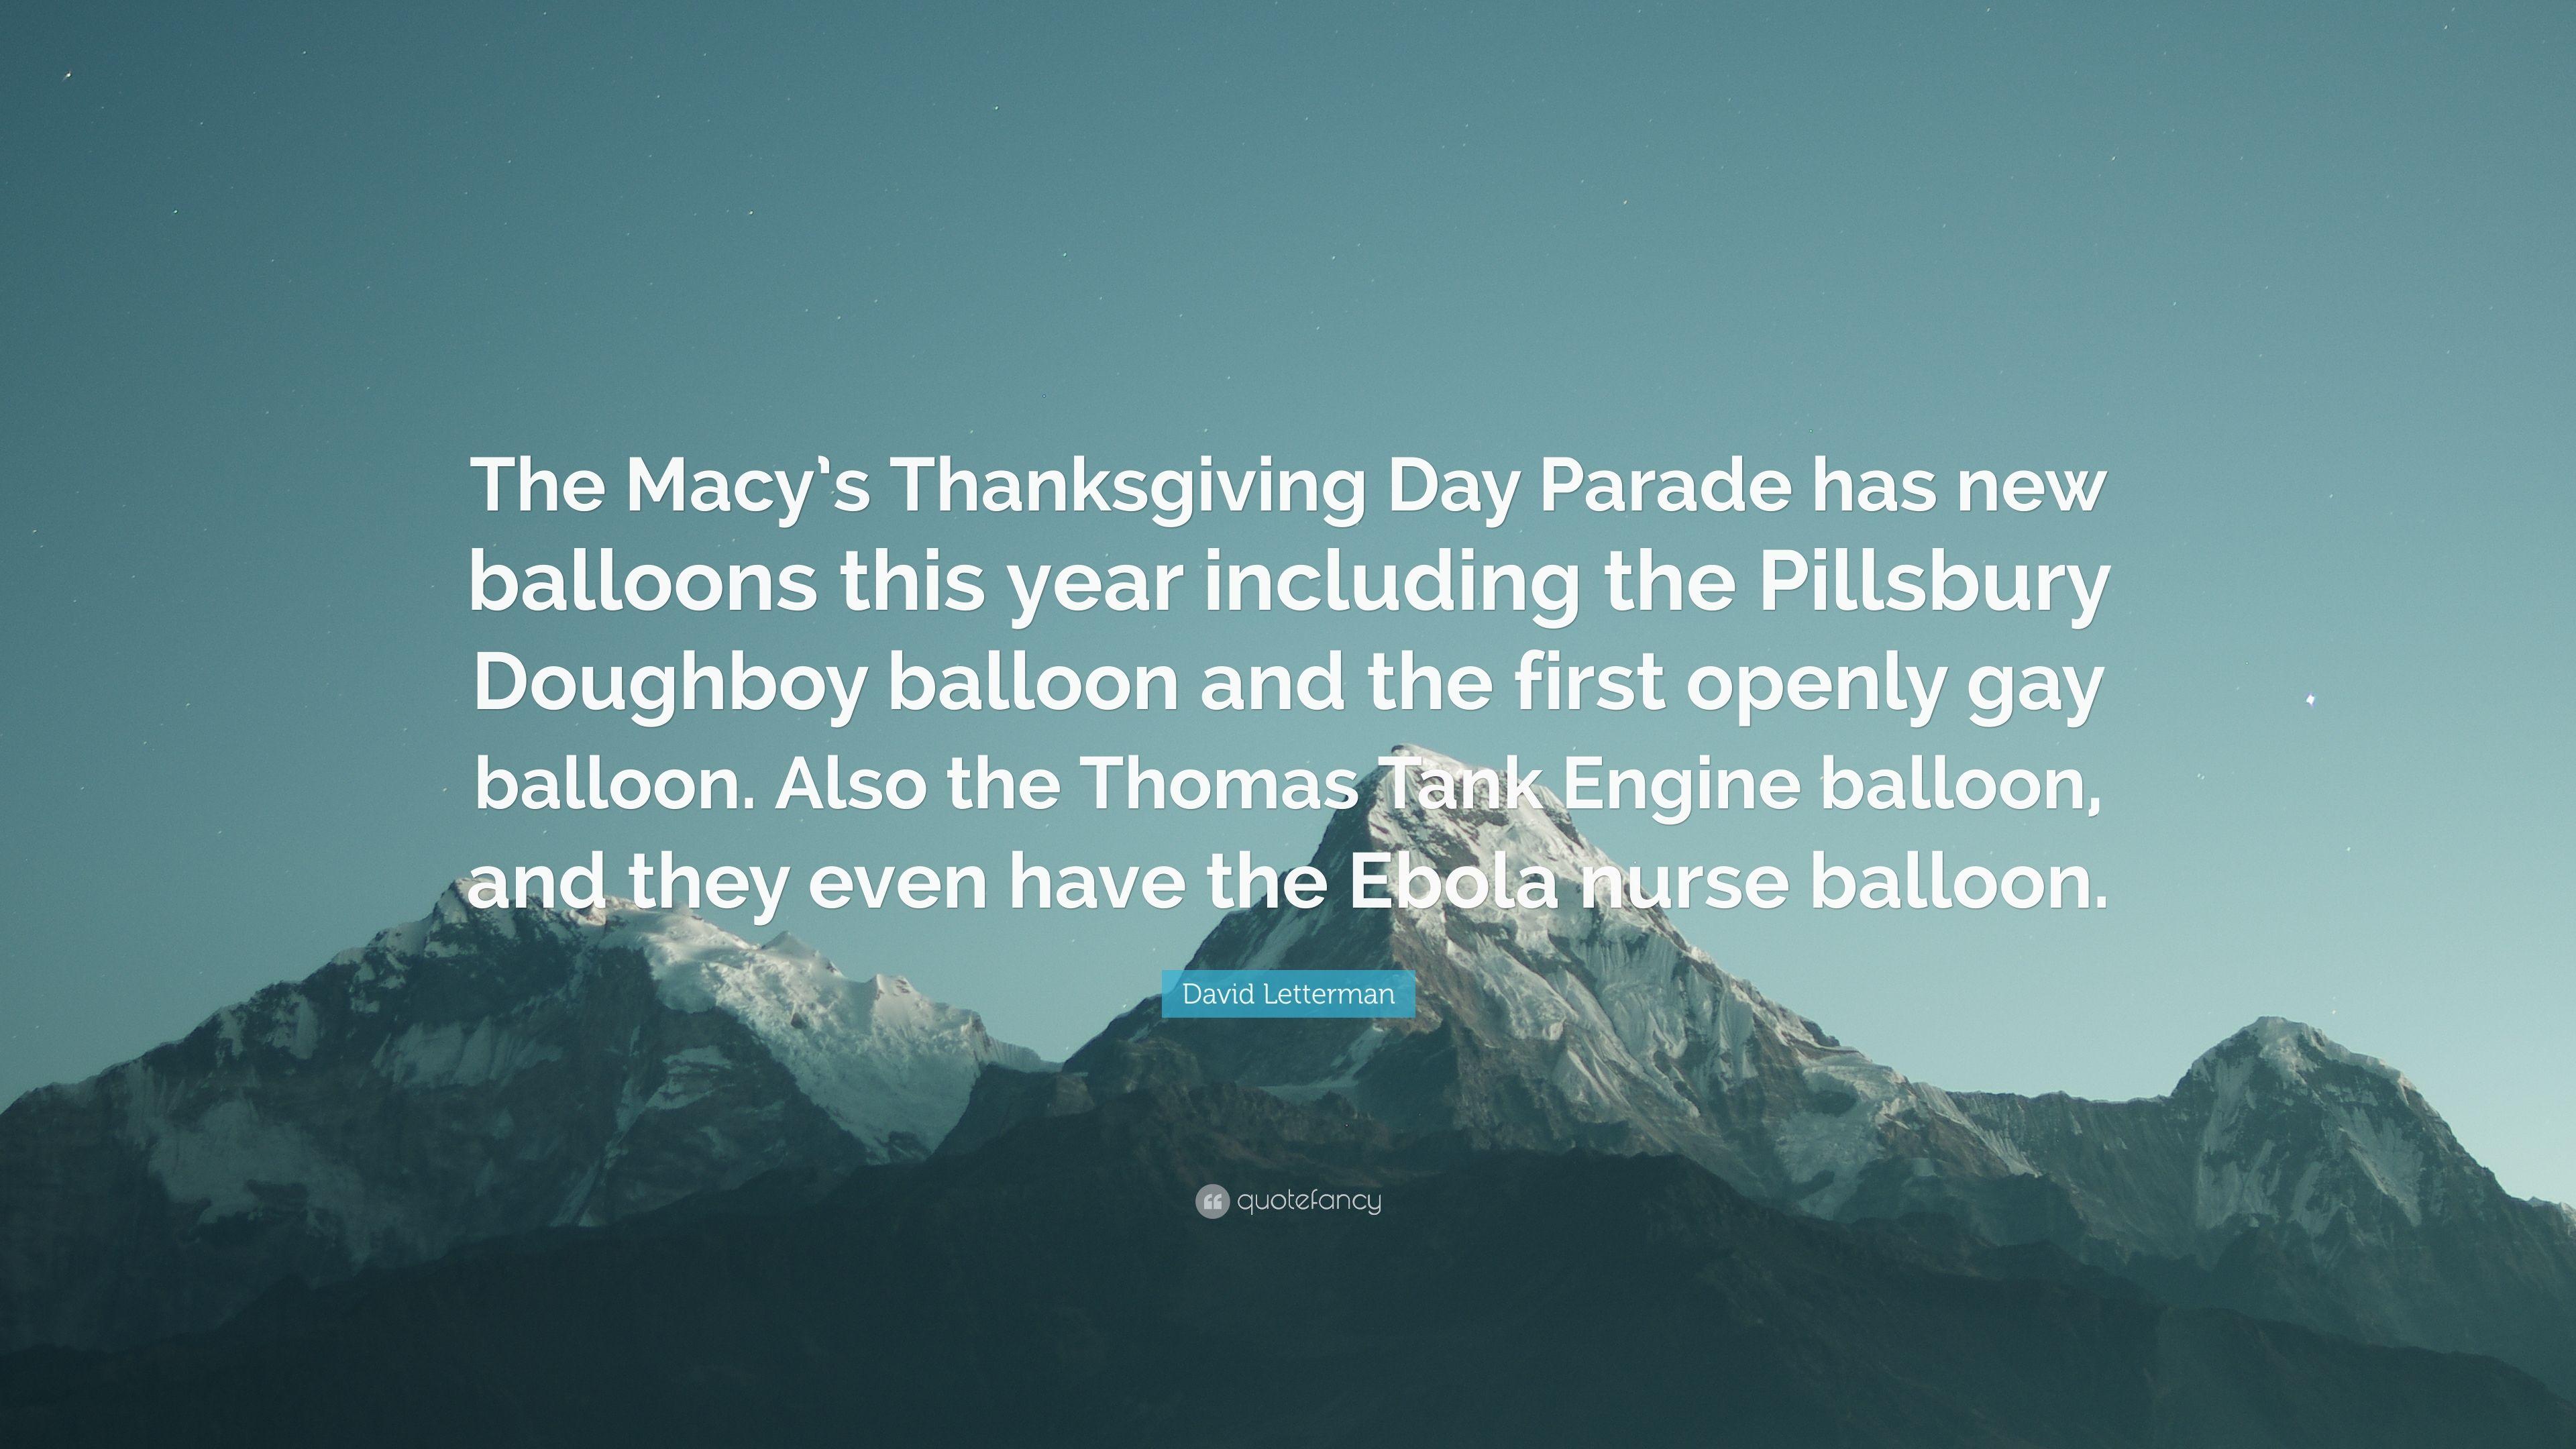 David Letterman Quote: “The Macy's Thanksgiving Day Parade has new